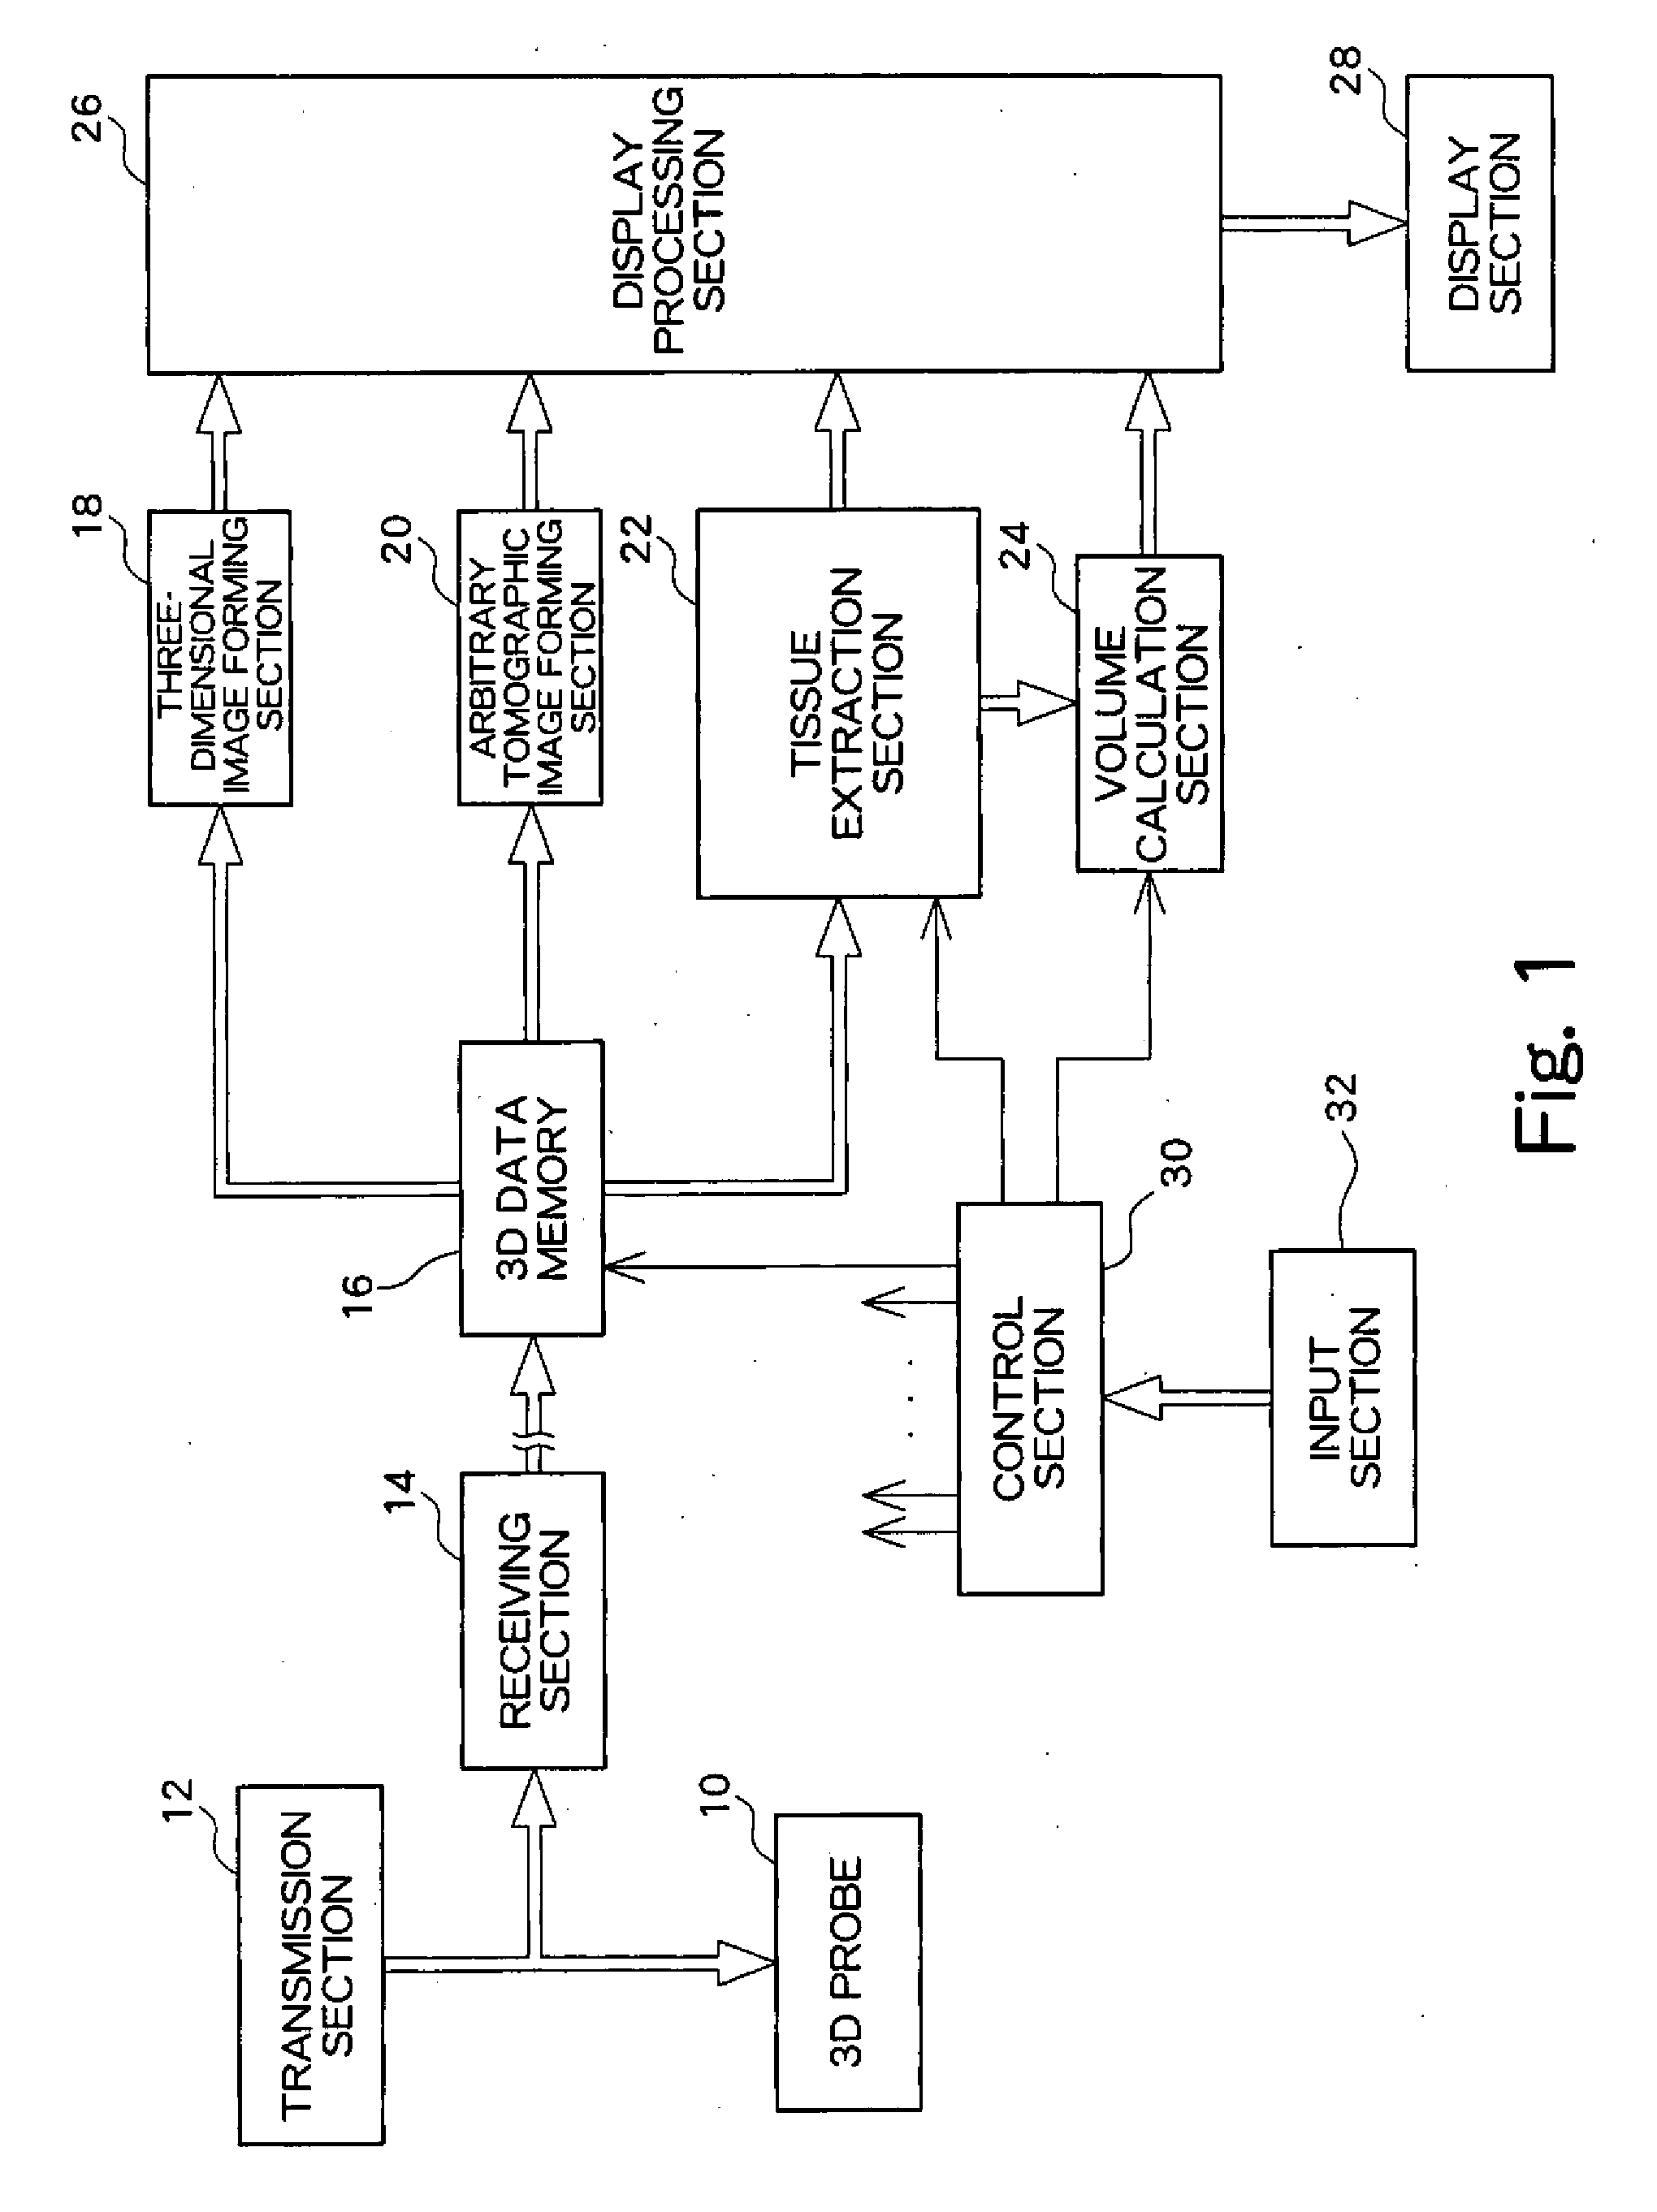 Ulstrasound diagnostic apparatus and volume data processing method